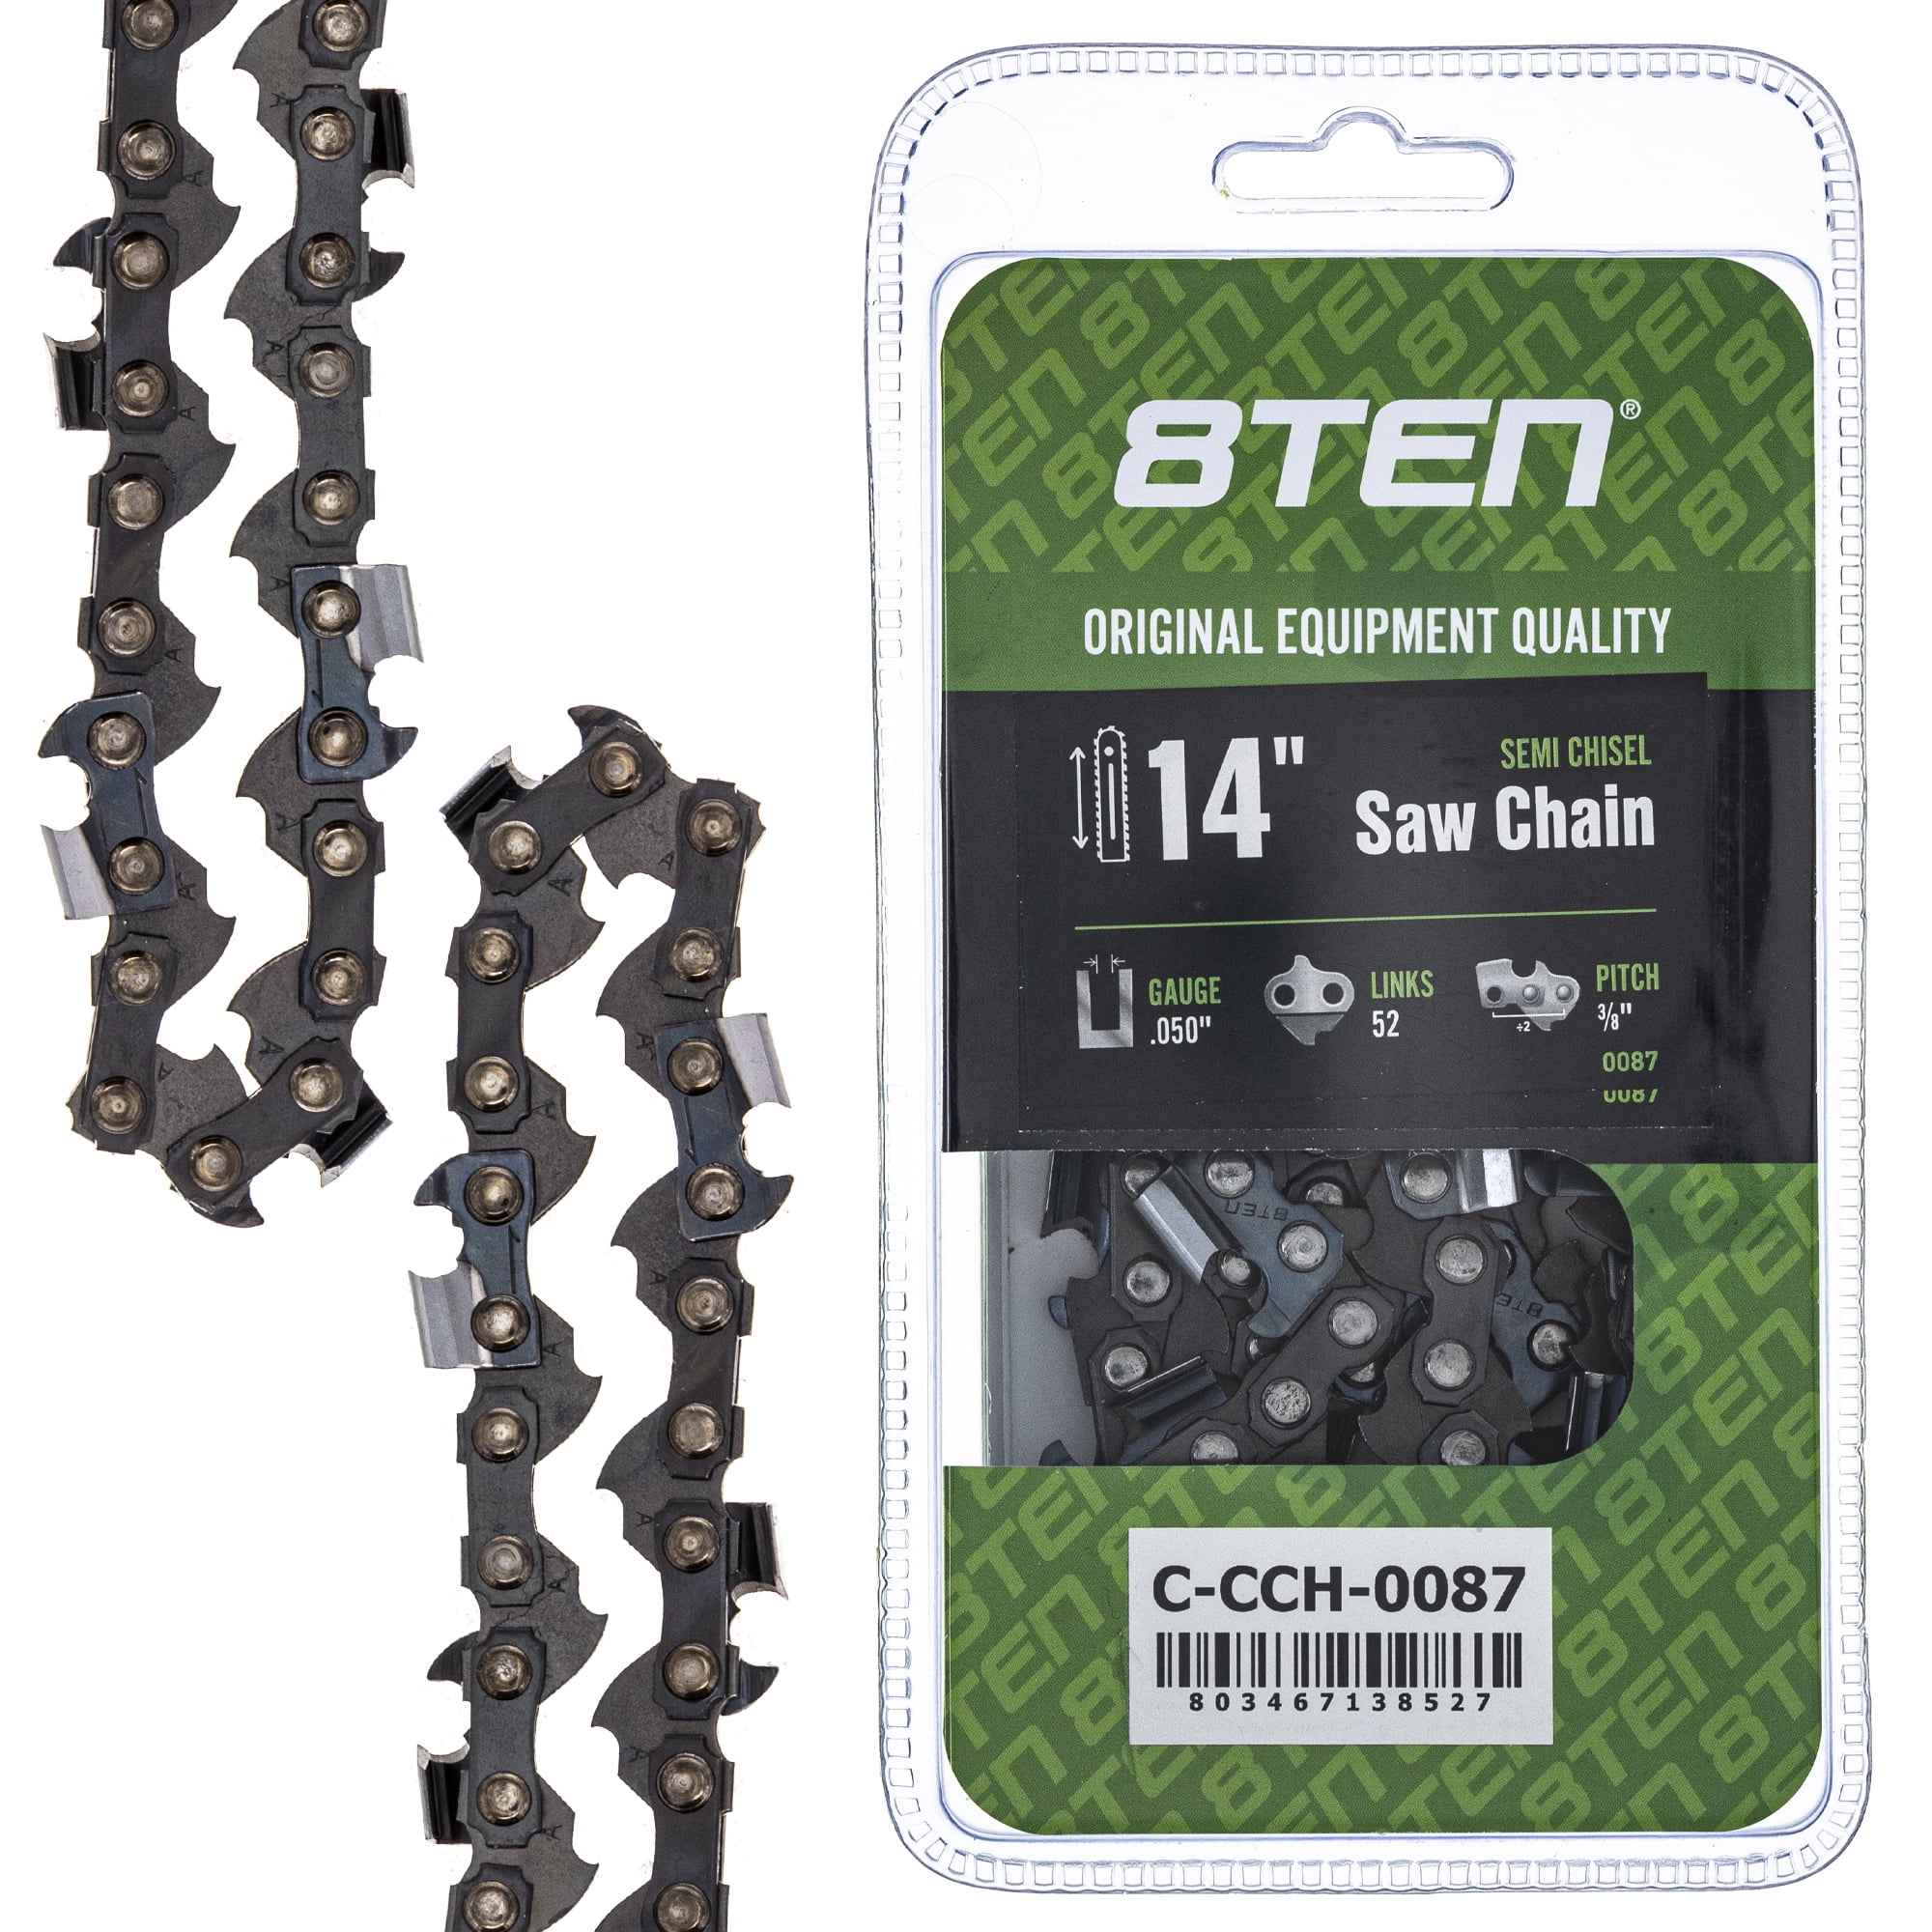 8ten chainsaw chain review